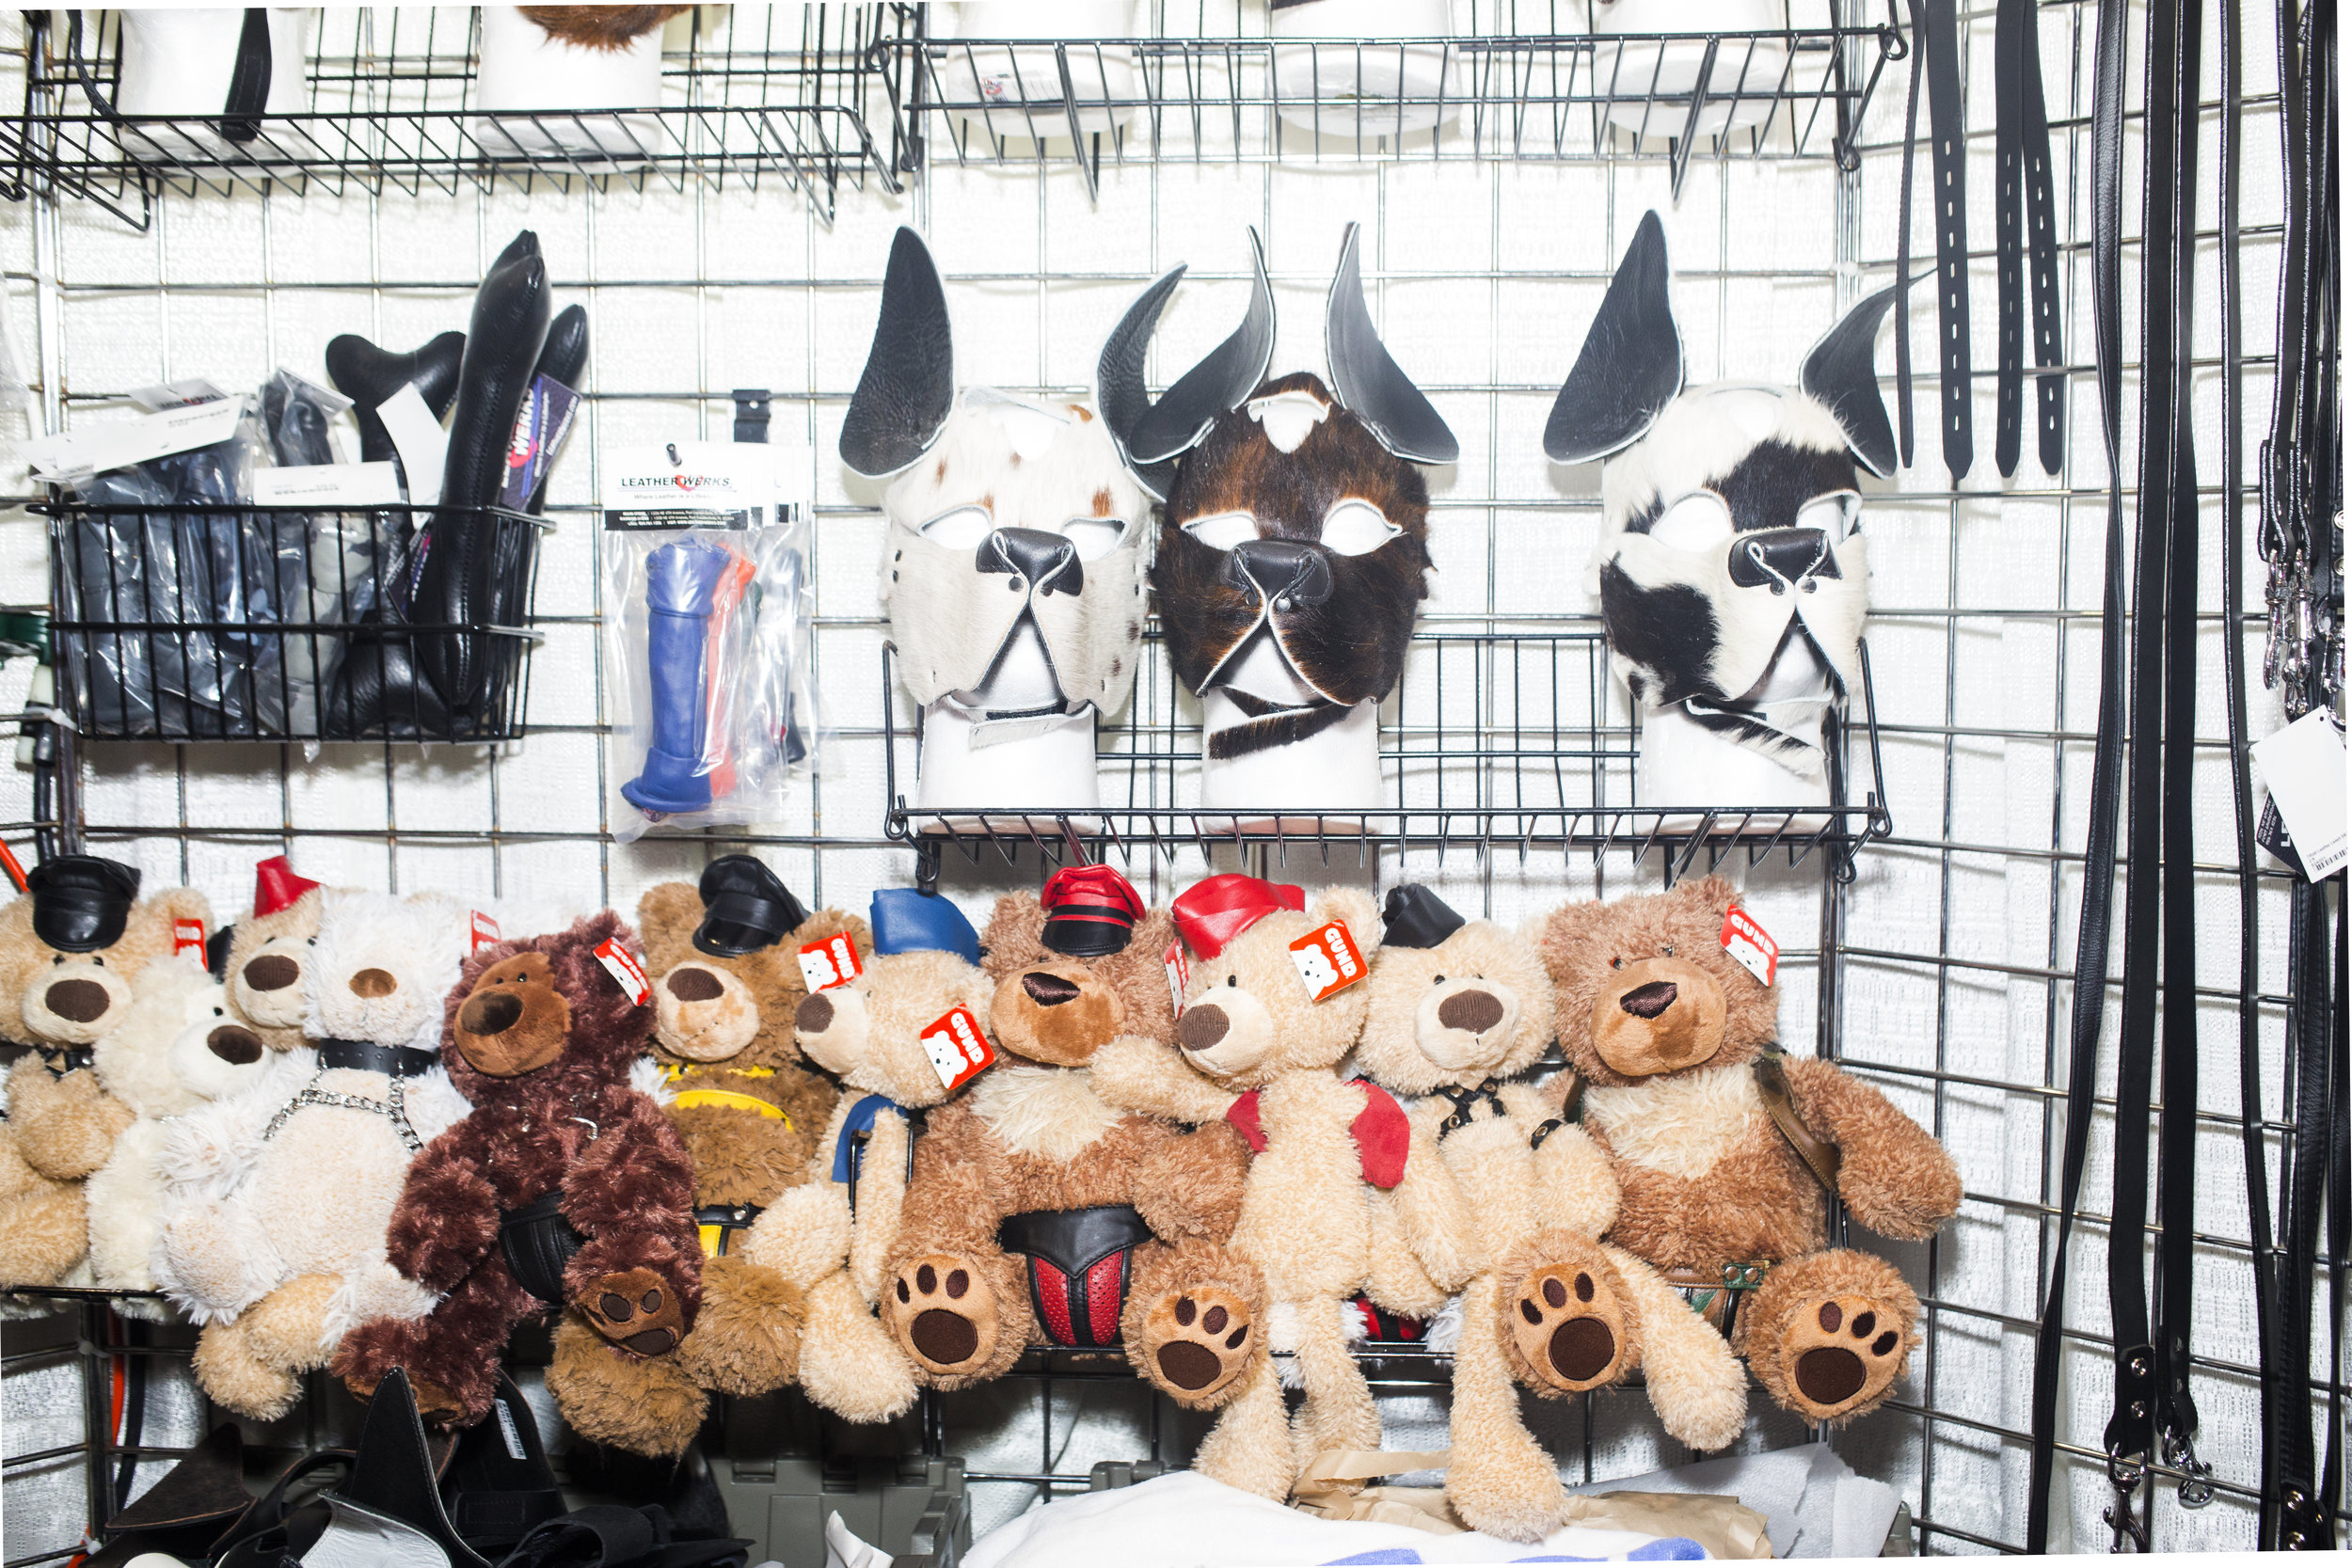  In the labyrinth of vendor booths at the leather market, attendees can find everything from poppers to pup masks with real fur, teddy bears in harnesses and leather caps, and bespoke leather works in every color.  